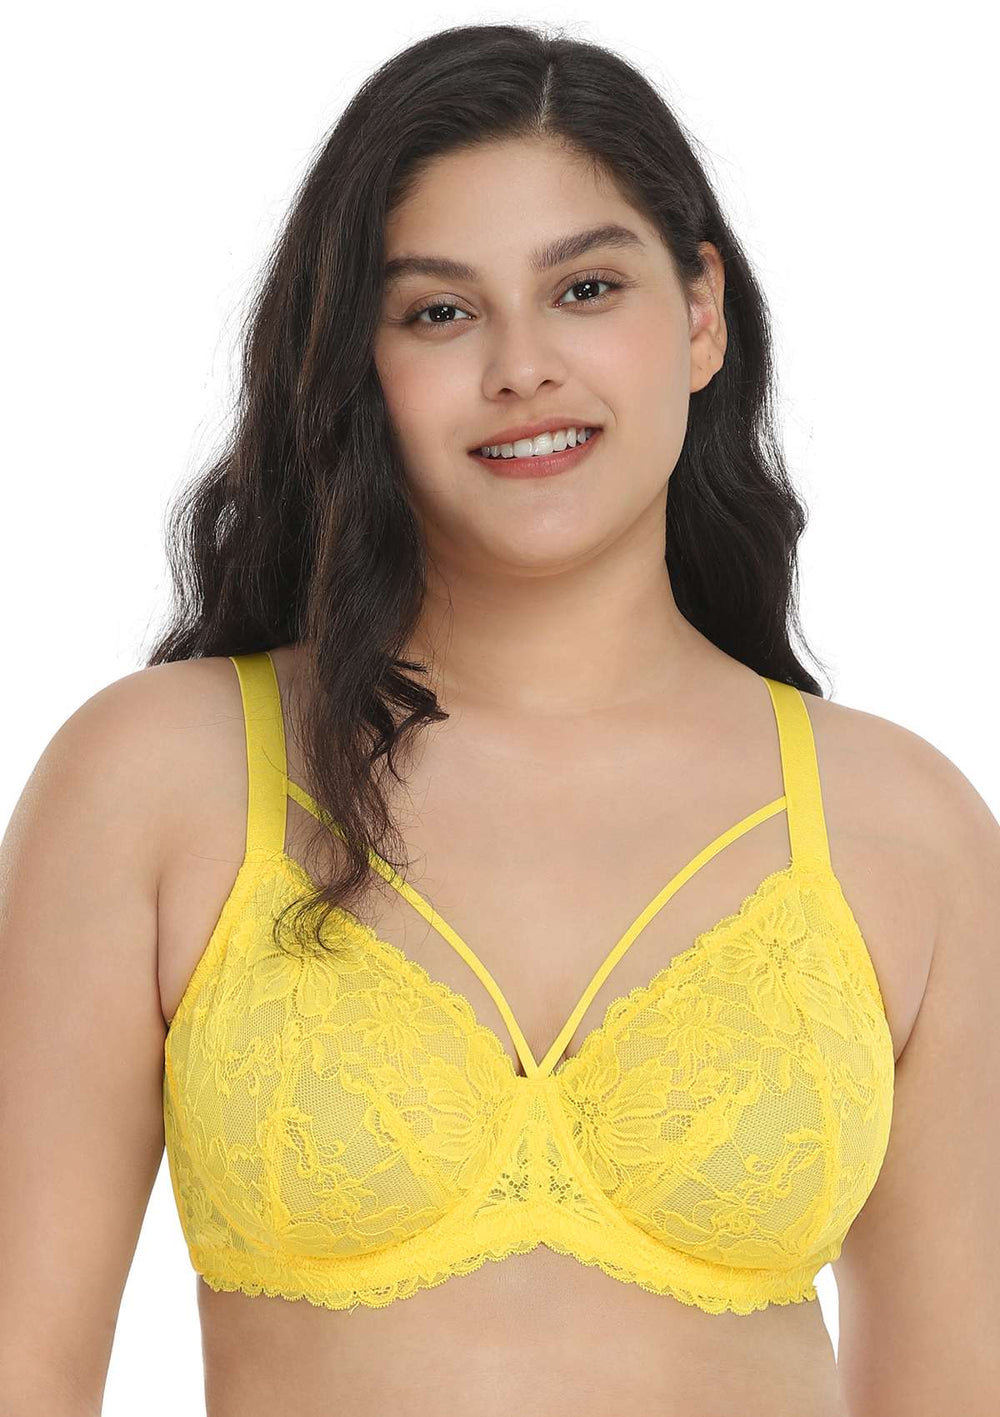 Forget Me Not Bra Lingerie - Yellow